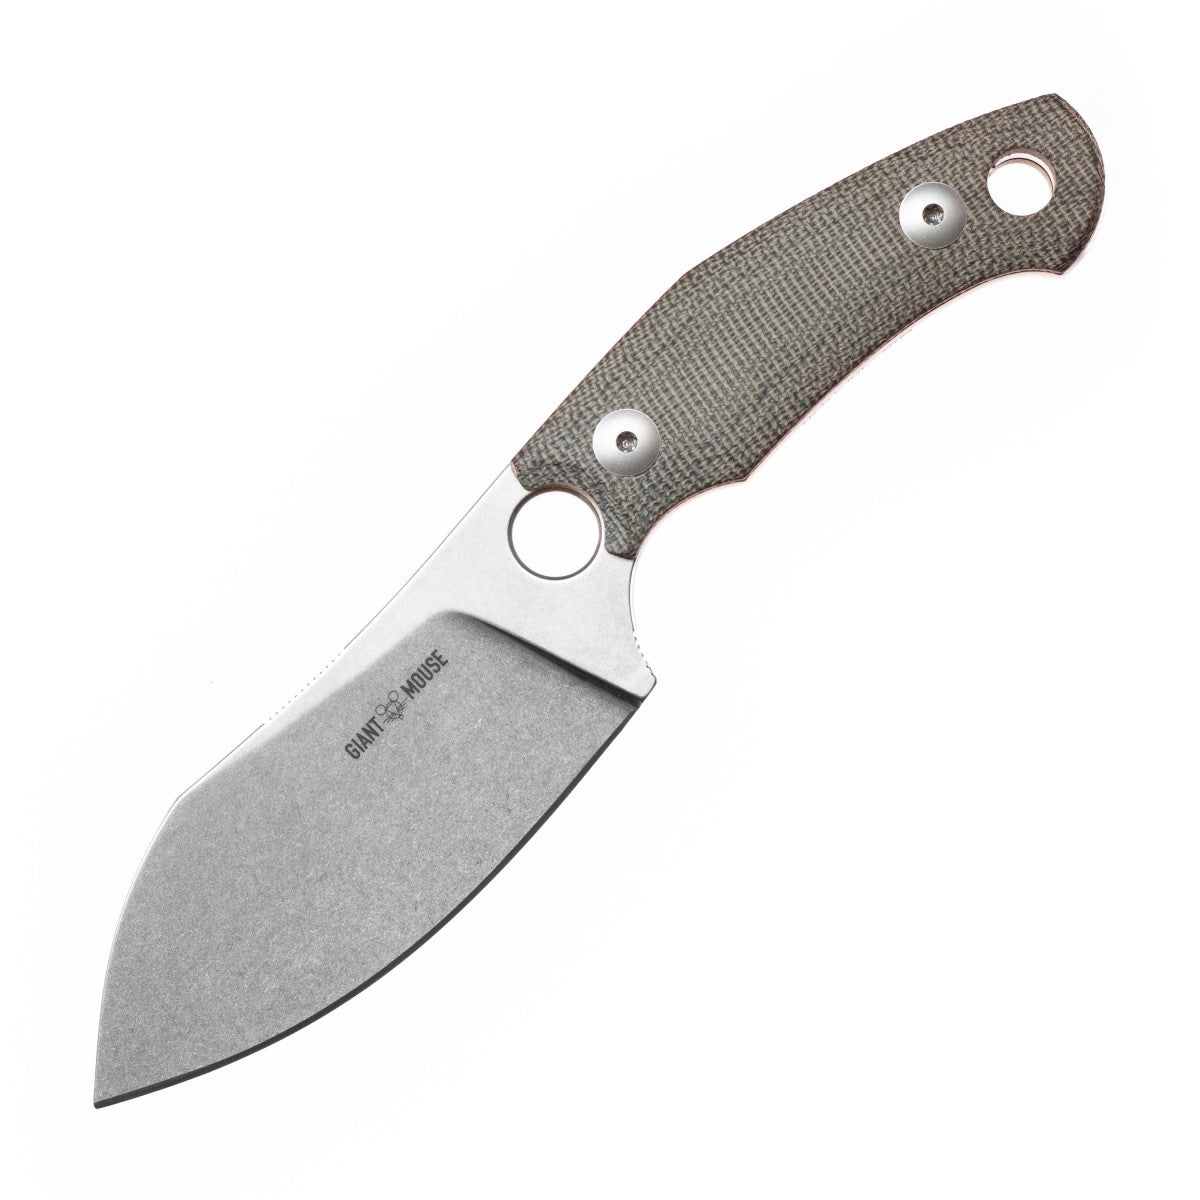 GiantMouse Knives GMF1-XL - Fixed Blade - N690 Steel - Micarta Handle